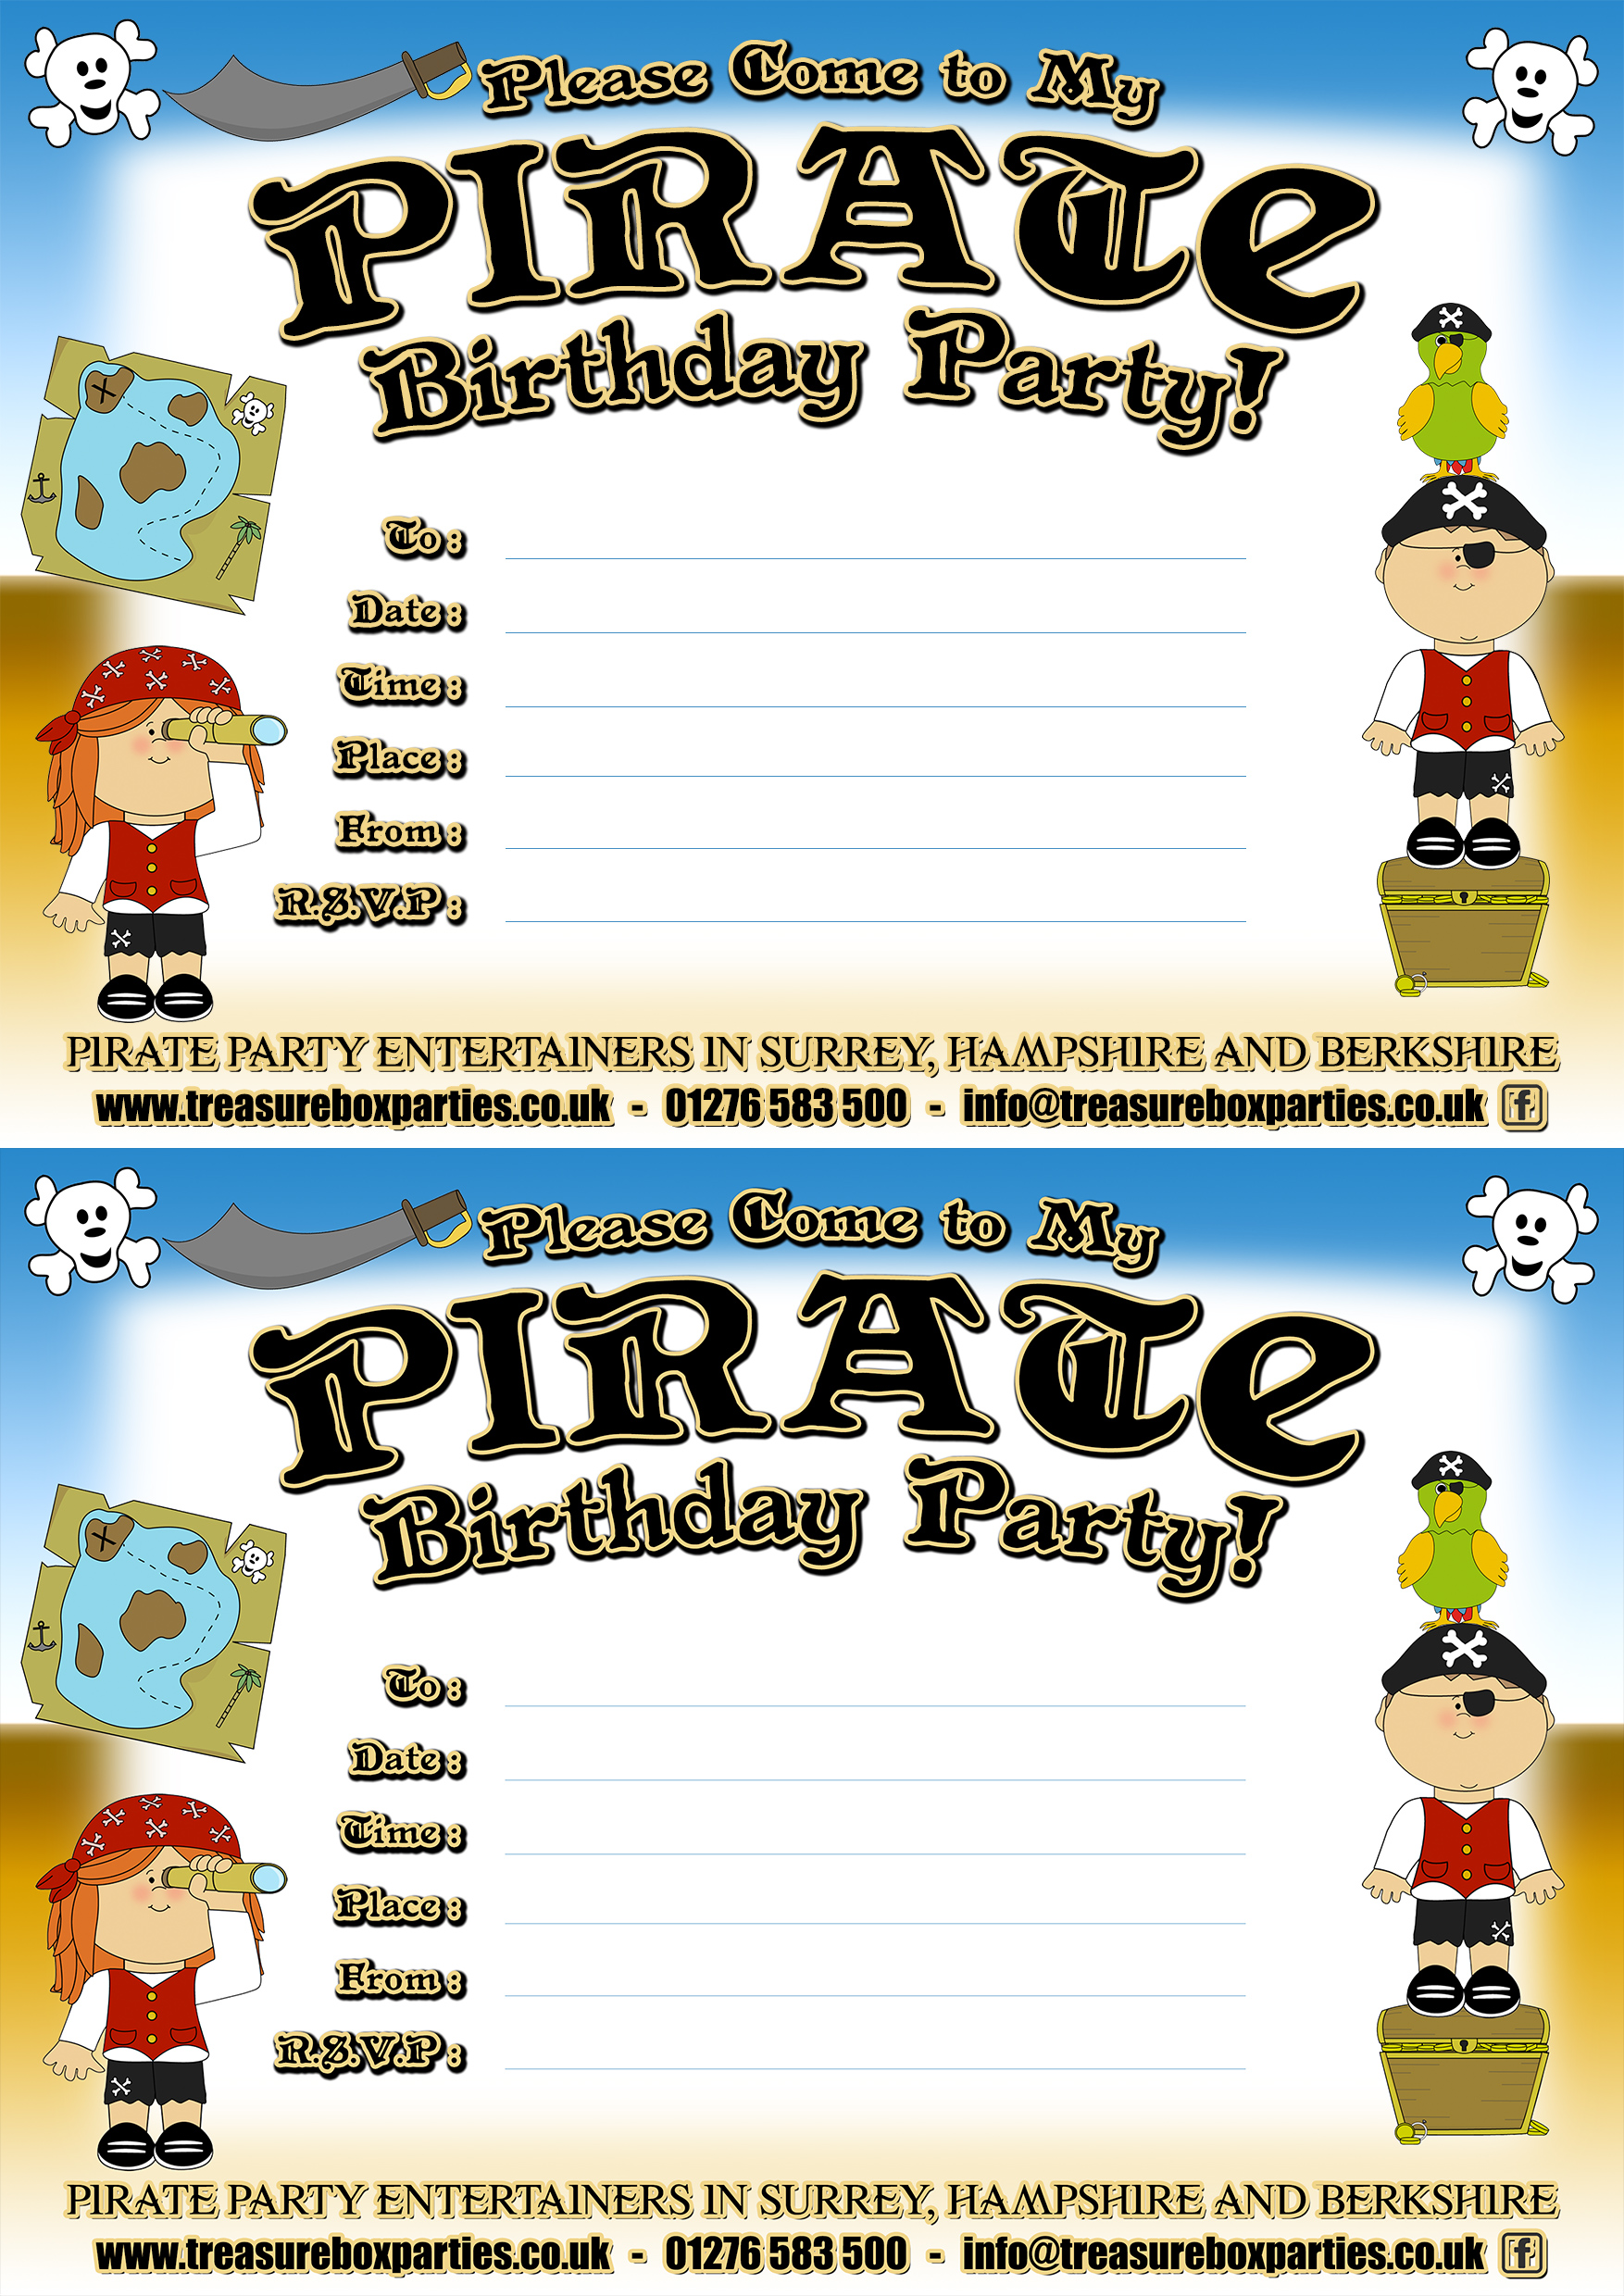 Free Pirate Party Printable Downloads! - Childrens Entertainer Parties  Surrey Berkshire Hampshire - Treasure Box Parties Supplies Kids Party Games  Ideas